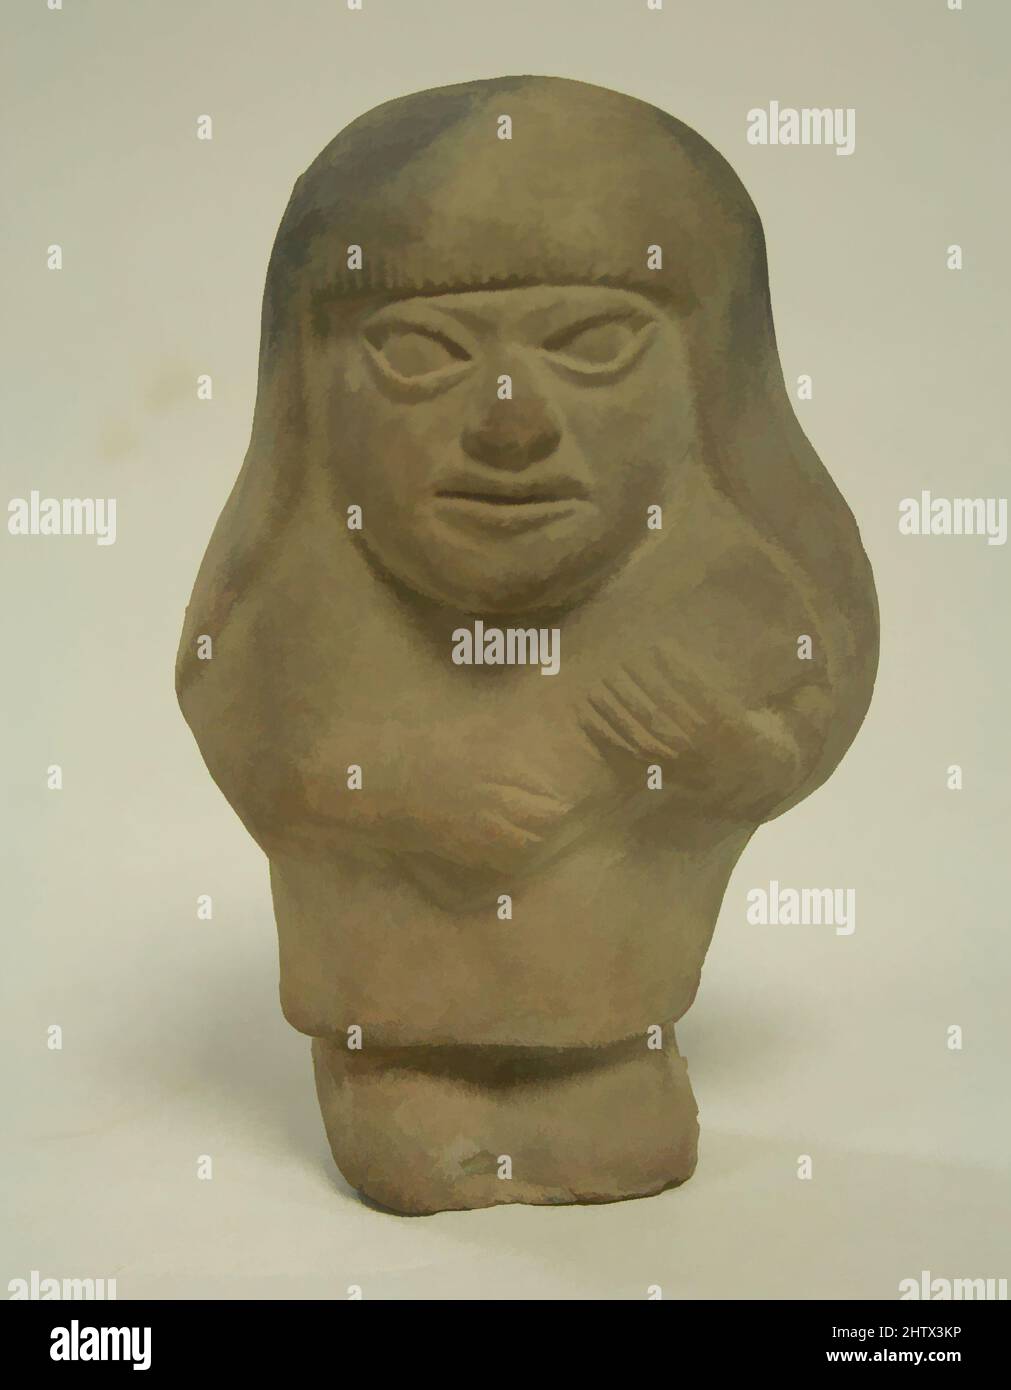 Art inspired by Standing Ceramic Figure, 3rd–5th century, Peru, Moche, Ceramic, H x W: 4 3/4 x 3in. (12.1 x 7.6cm), Ceramics-Sculpture, Classic works modernized by Artotop with a splash of modernity. Shapes, color and value, eye-catching visual impact on art. Emotions through freedom of artworks in a contemporary way. A timeless message pursuing a wildly creative new direction. Artists turning to the digital medium and creating the Artotop NFT Stock Photo